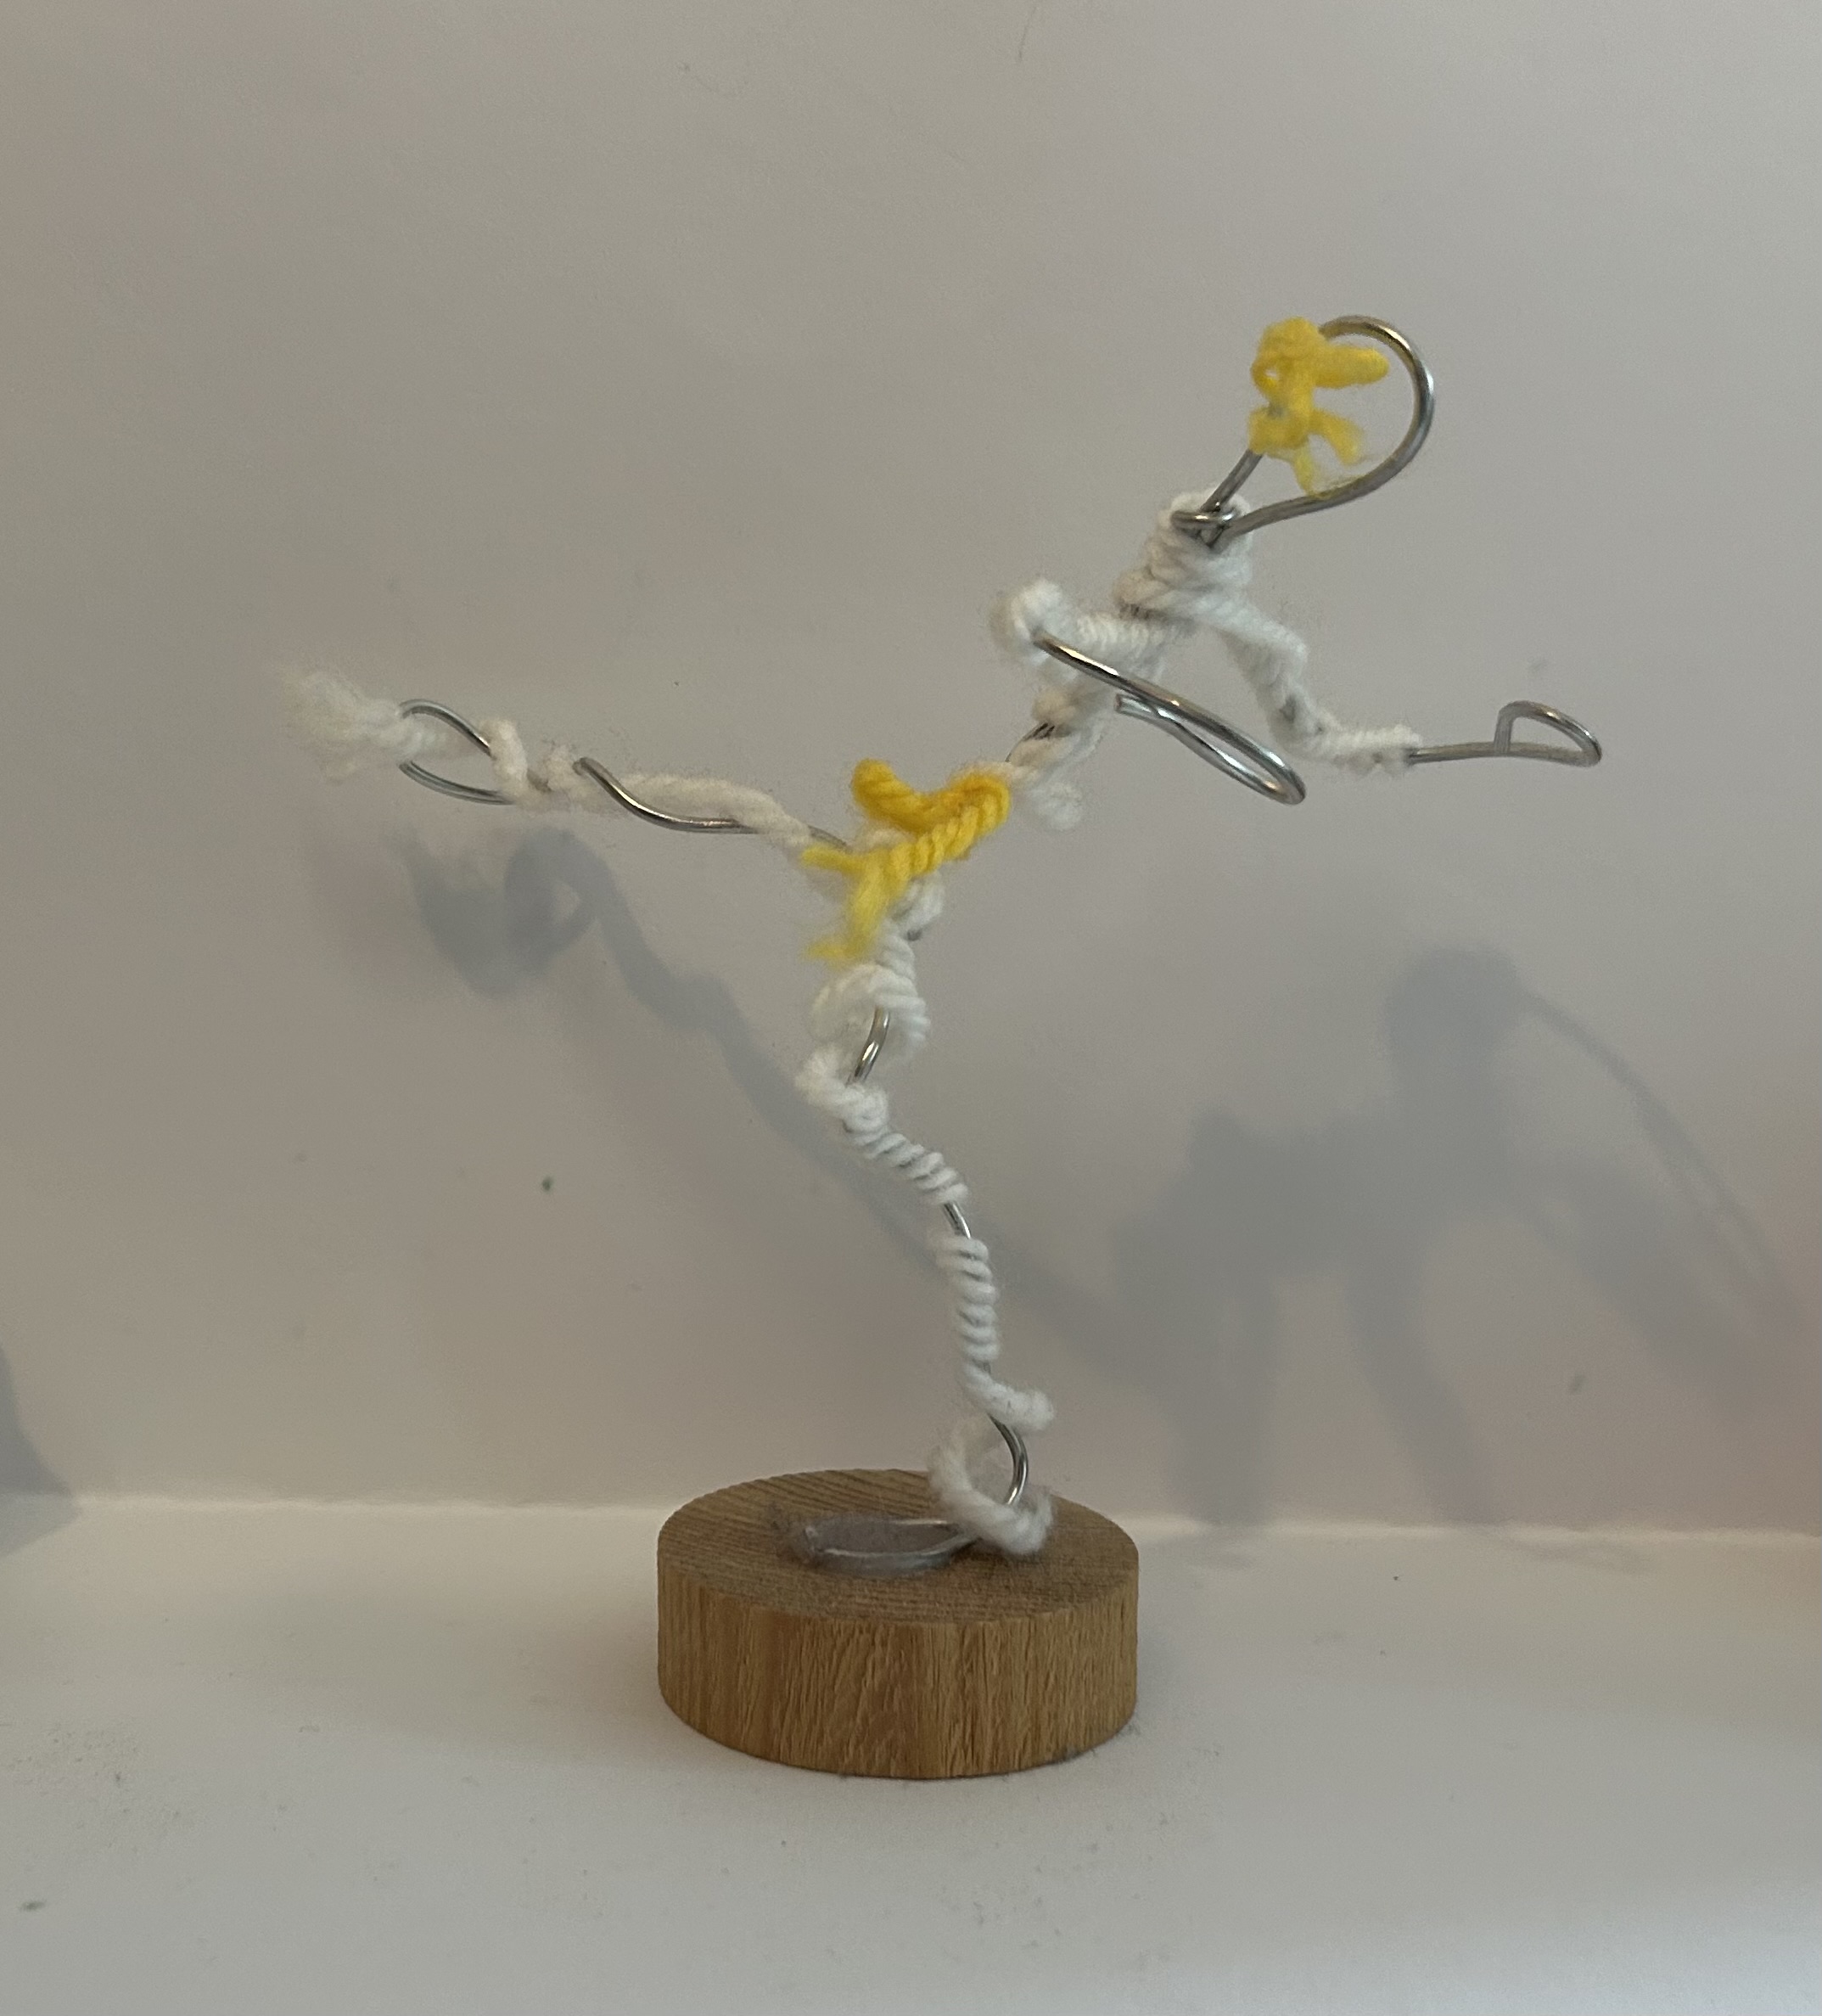 a figure on a round wood block. the figure is made of wire with white and yellow string around it. the figure looks like a kung fu fighter kicking. made by a child.